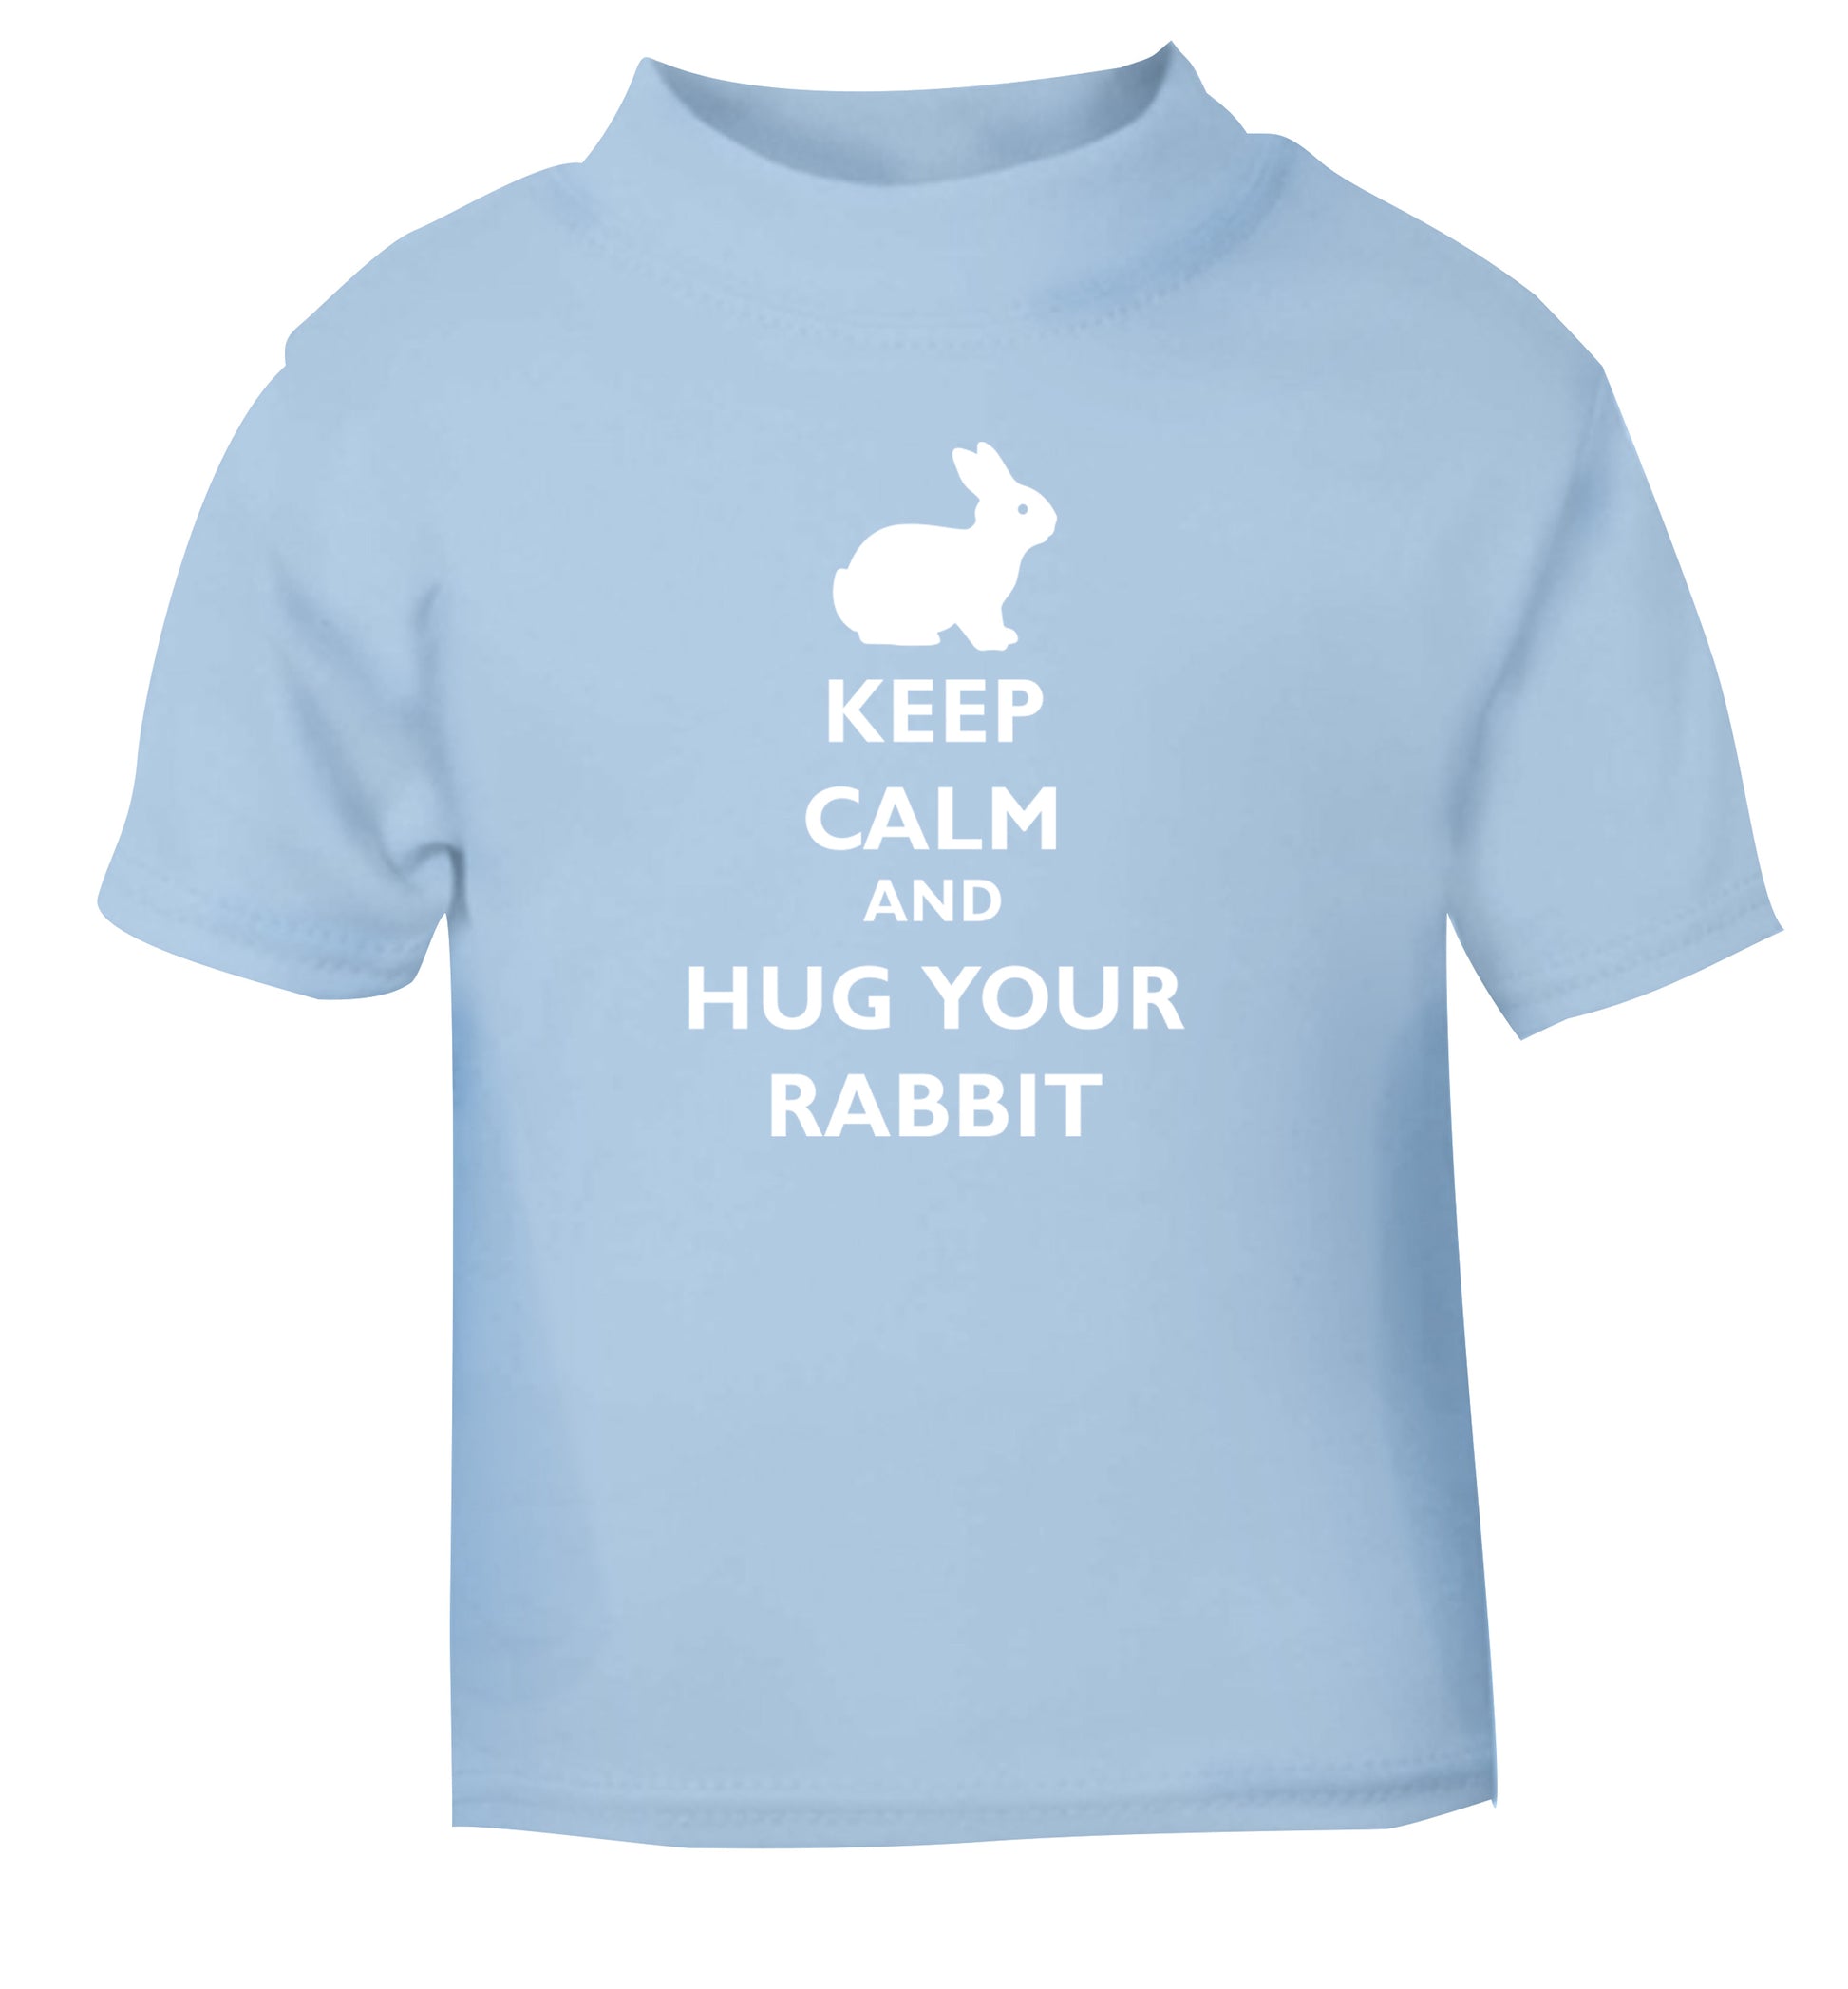 Keep calm and hug your rabbit light blue Baby Toddler Tshirt 2 Years